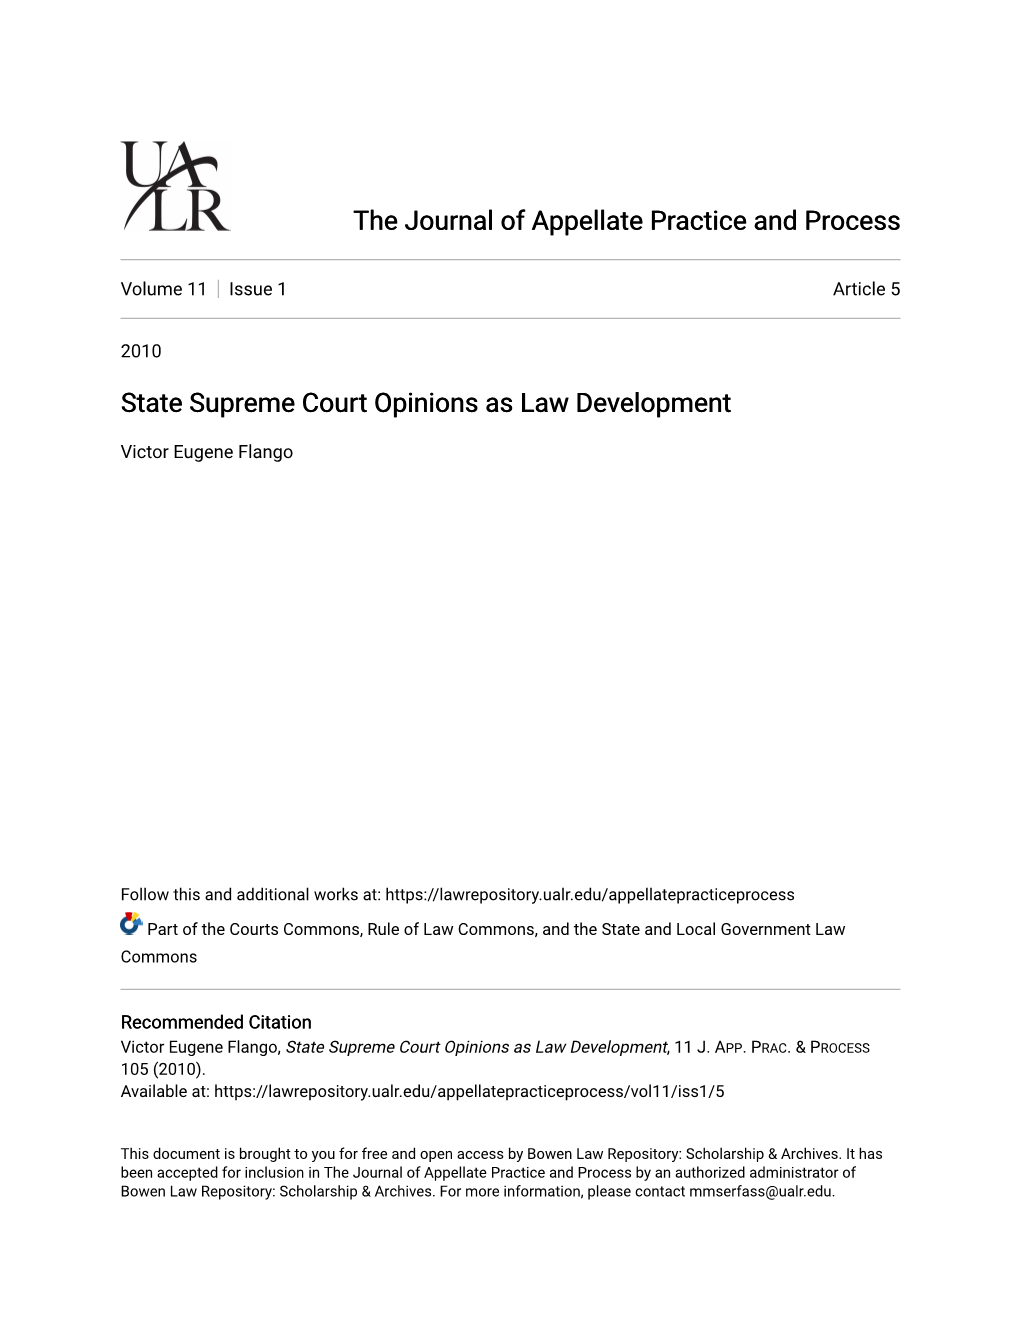 State Supreme Court Opinions As Law Development